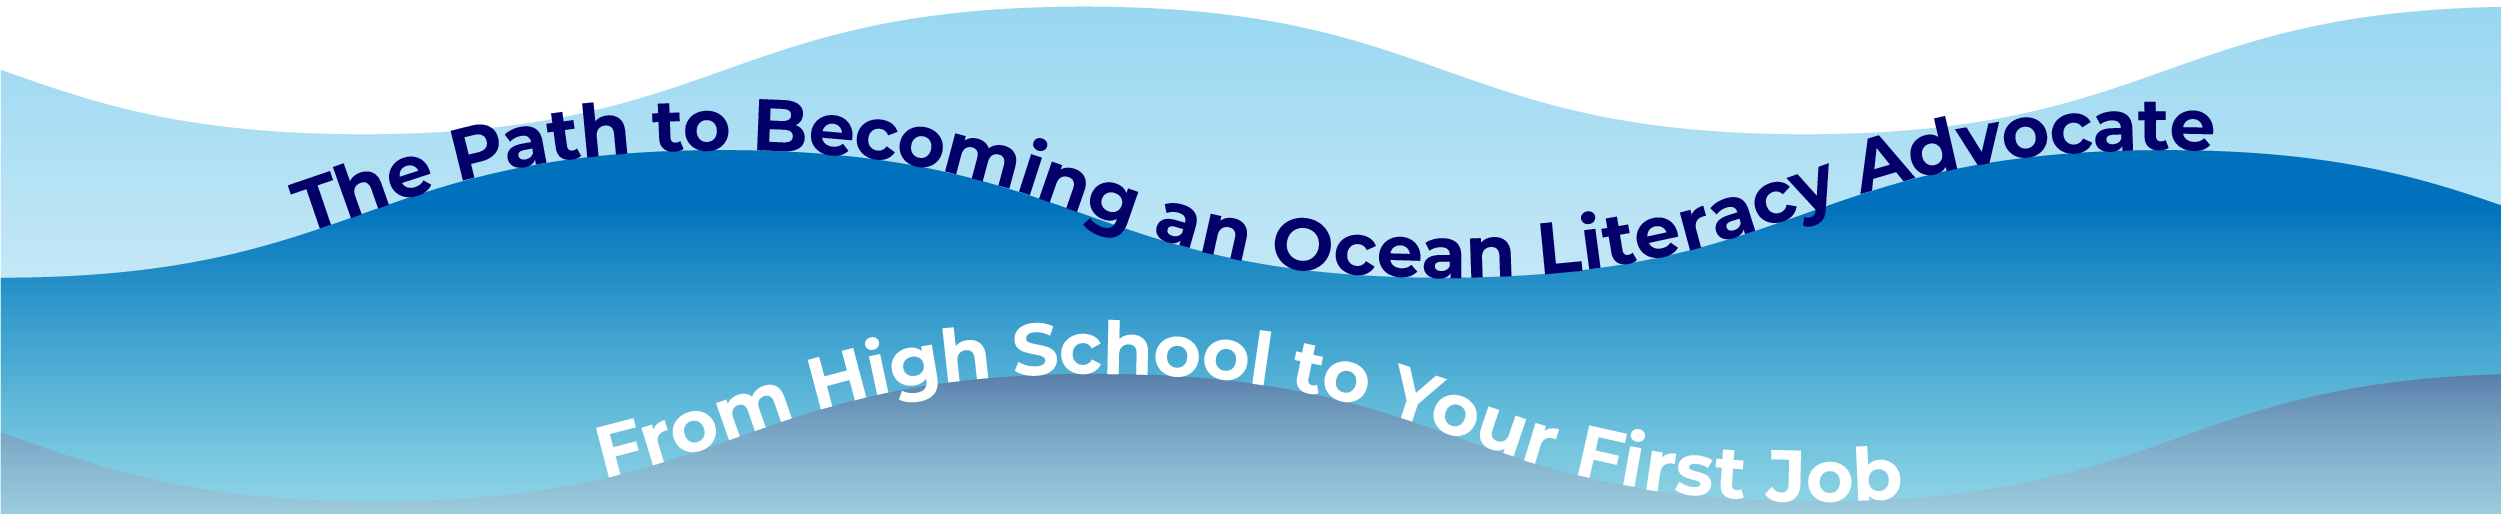 The path to becoming an ocean literacy advocate